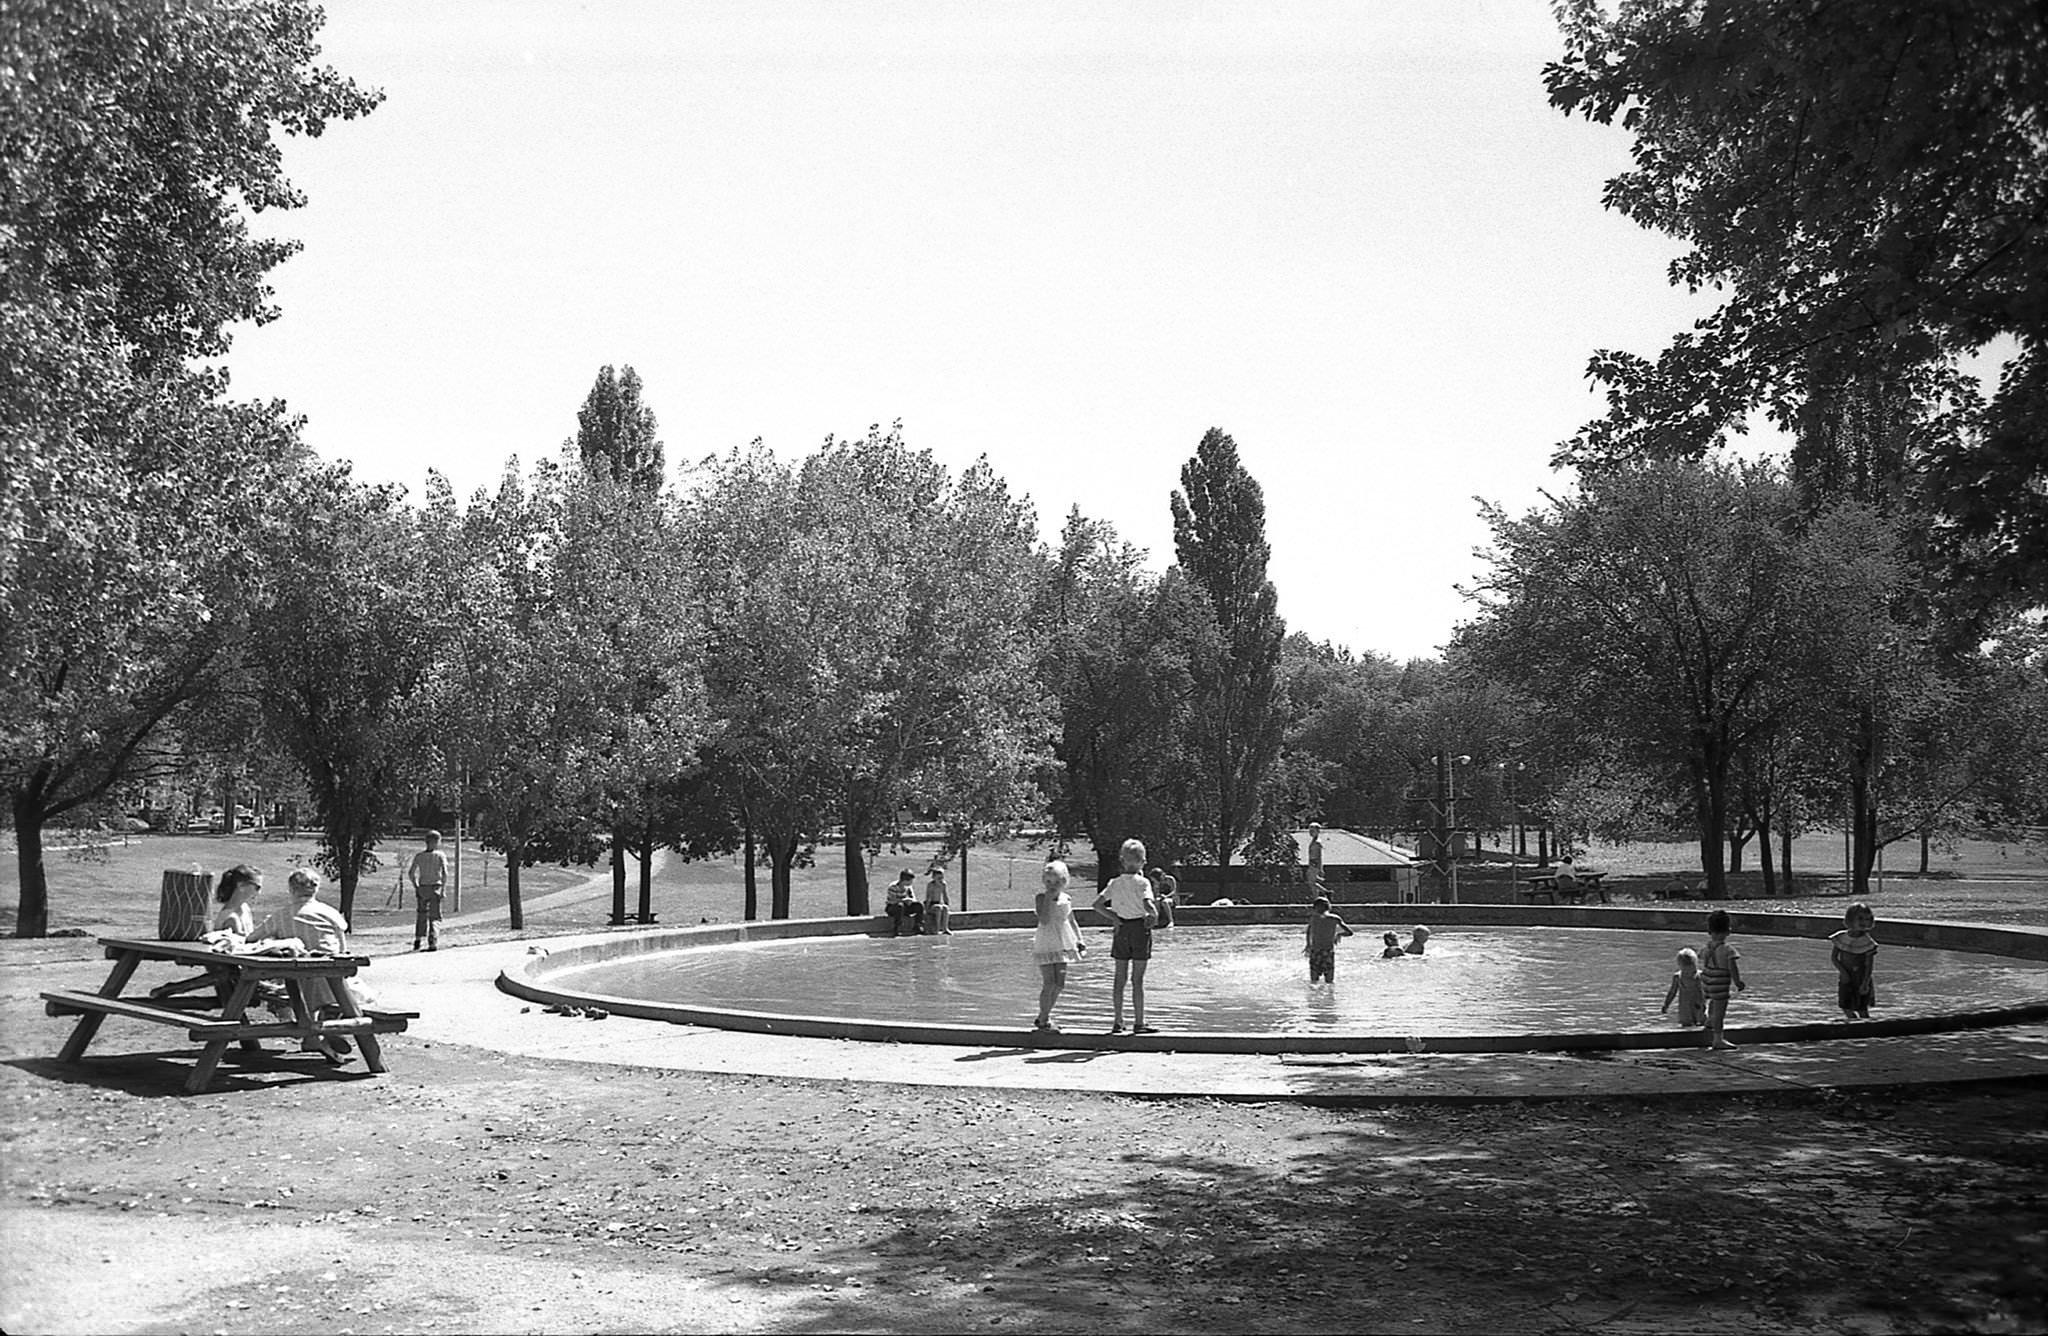 Withrow Park, looking east (ESE) across the park from the wading pool toward the outdoor rink, 1960s